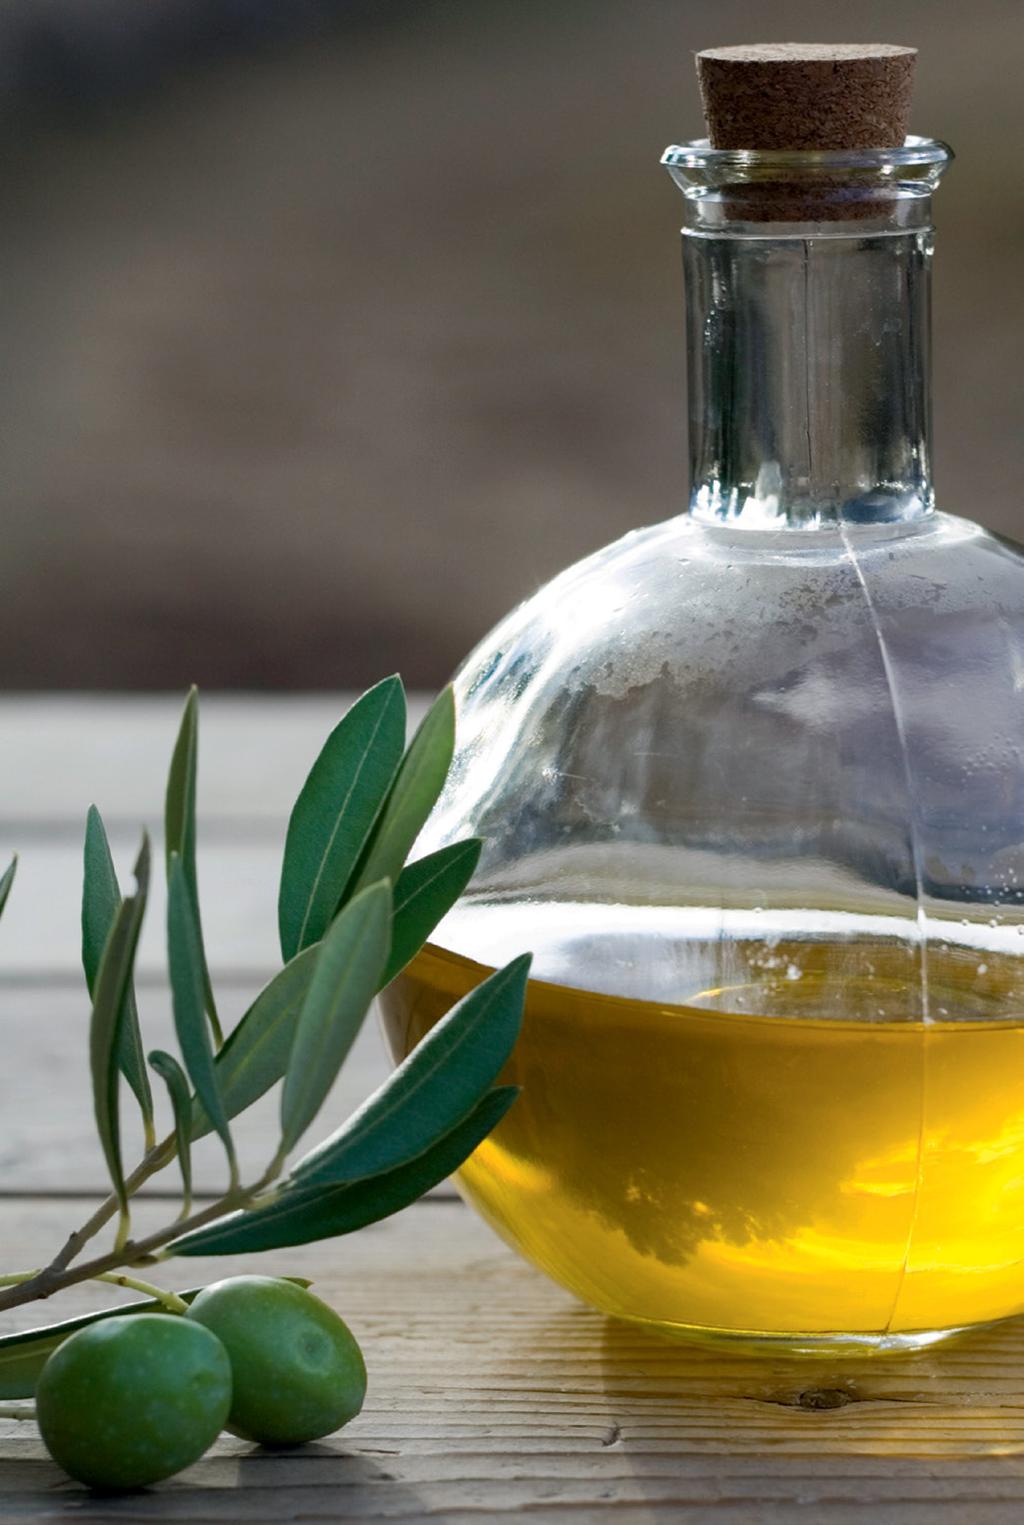 More than 6000 years ago, the olive had already been discovered in Asia Minor as a versatile fruit for eating and cosmetics.